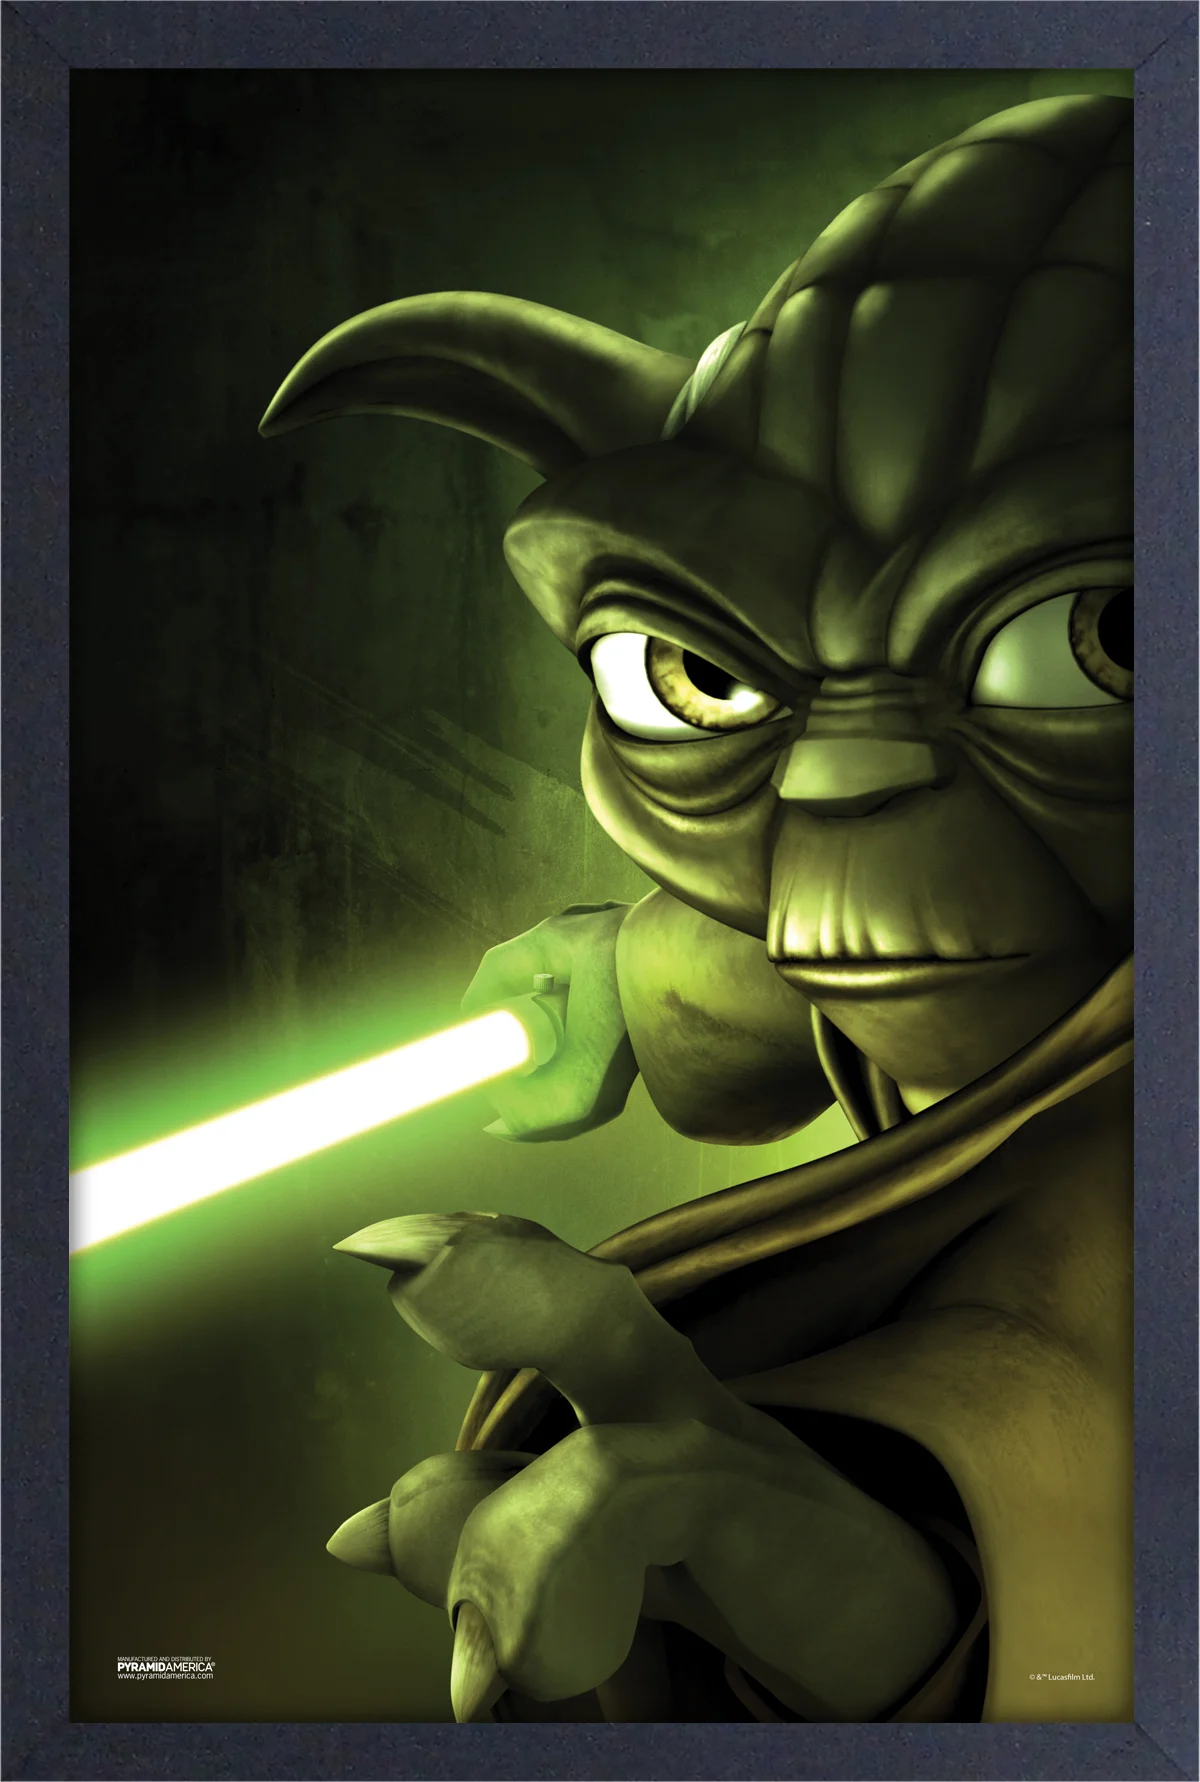 Star Wars - Yoda (11"x17" Gel-Coat) (Order in multiples of 6, mix and match styles)